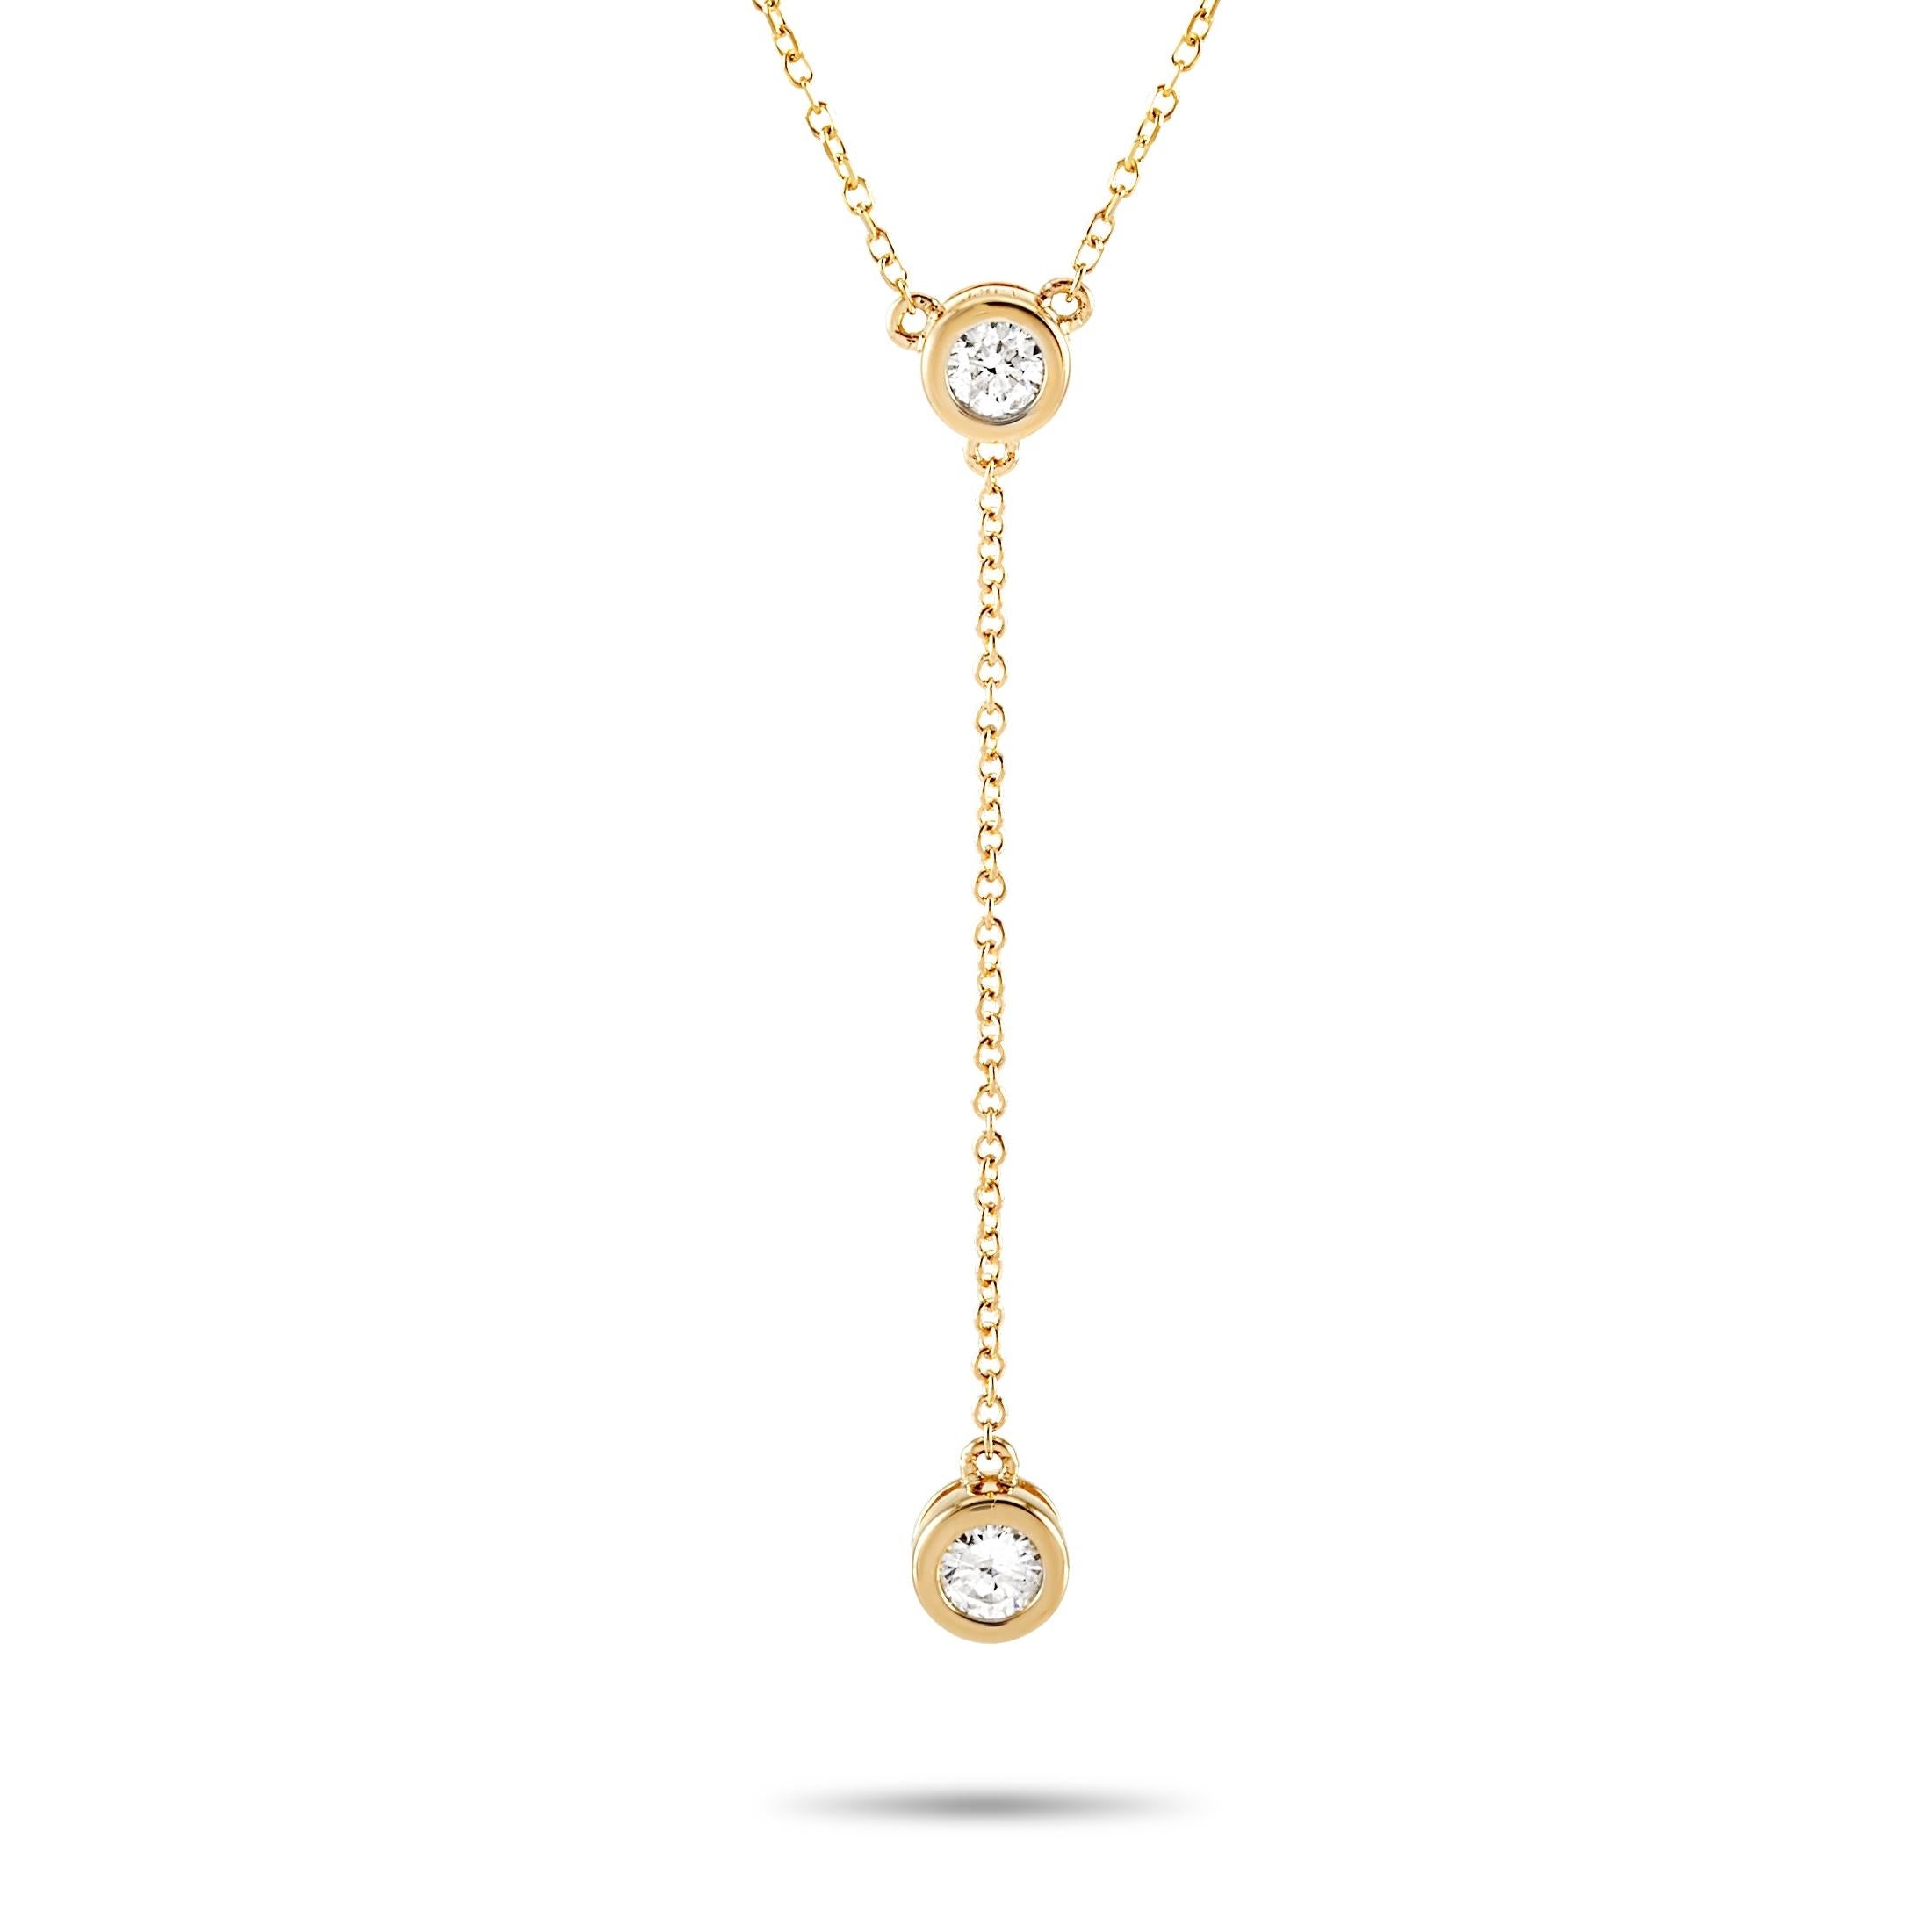 This LB Exclusive necklace is made of 14K yellow gold and embellished with diamonds that total 0.20 carats. The necklace weighs 1.7 grams and boasts a 15” chain and a pendant that measures 1.50” in length and 0.13” in width.

Offered in brand new